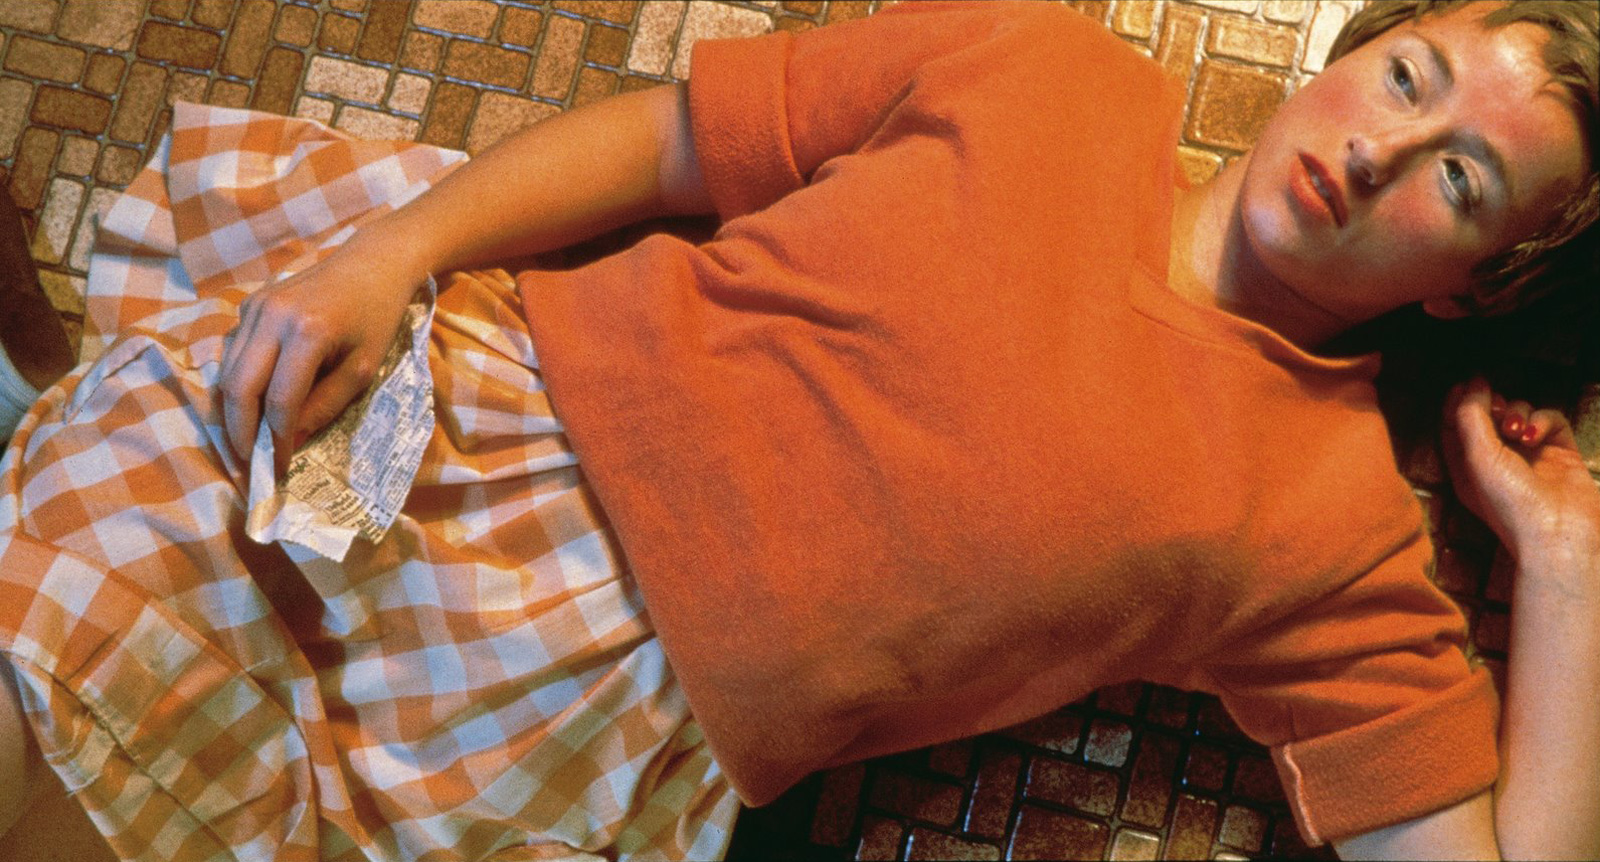 Most Expensive Art Photo - Cindy Sherman’s 1981 Photo "Untitled #96"